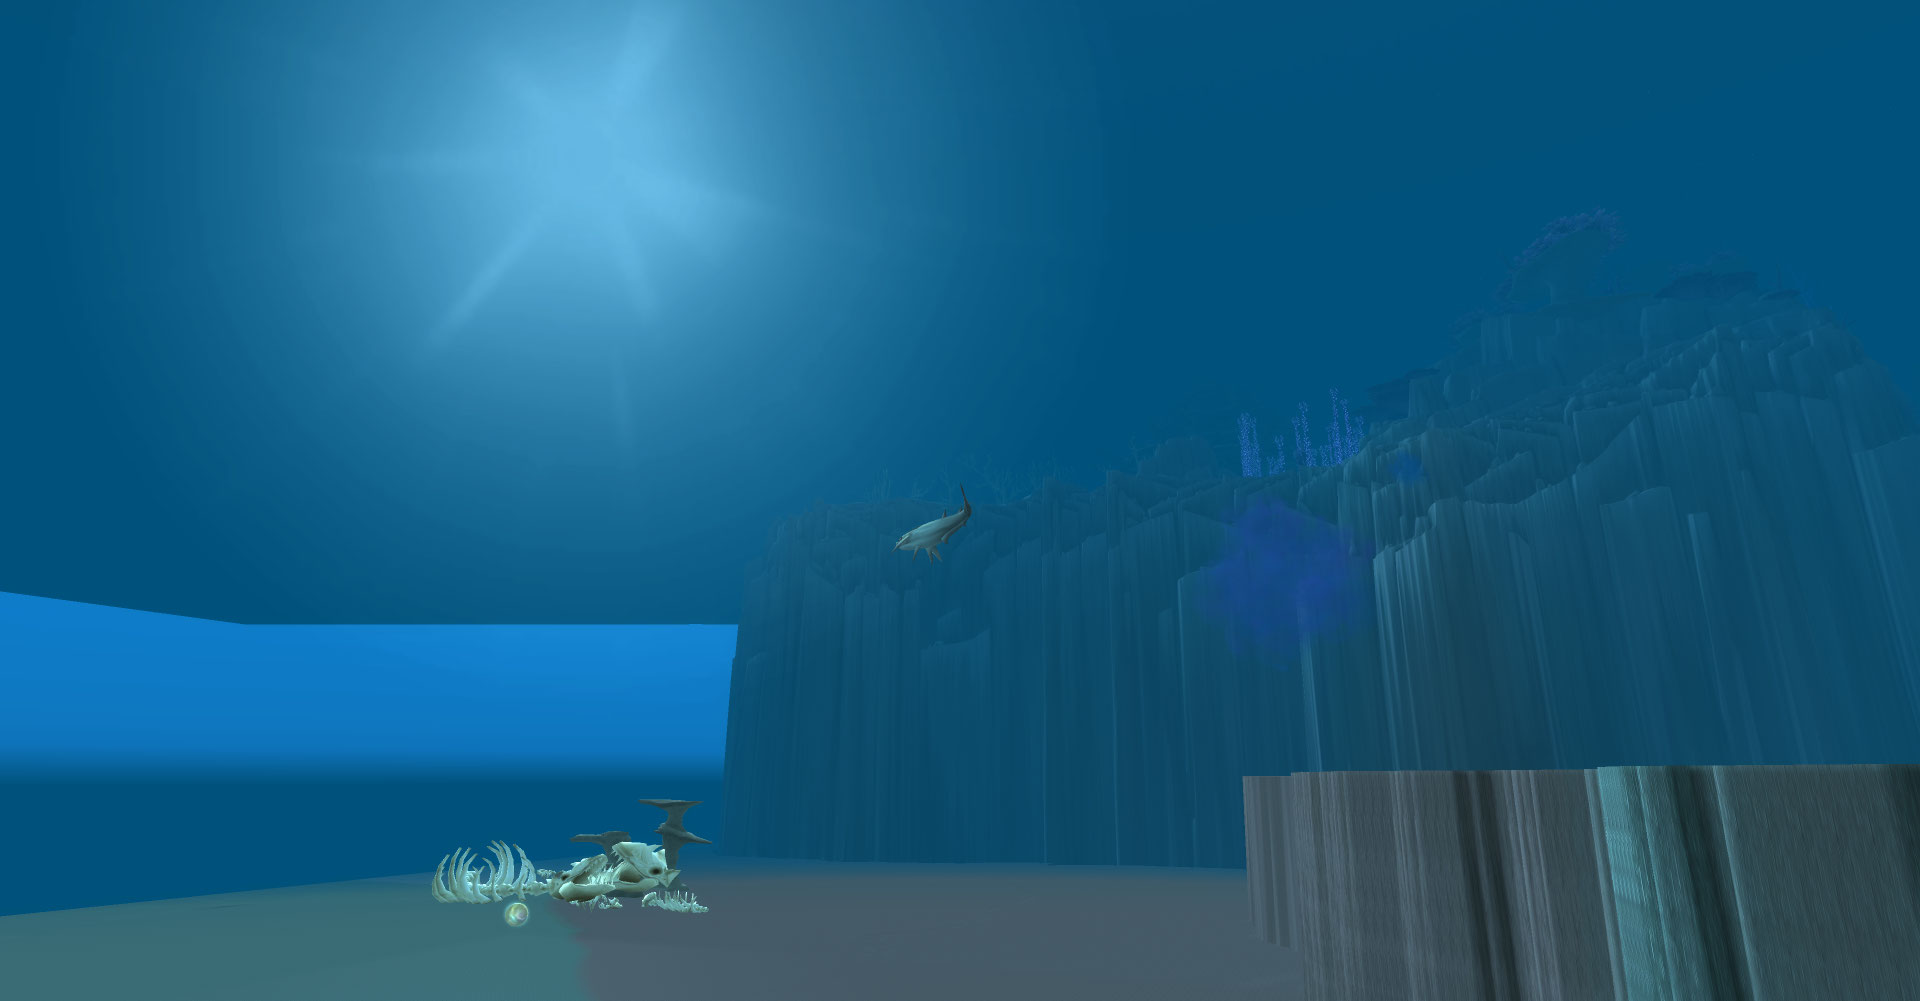 Depths of the Azeroth oceans